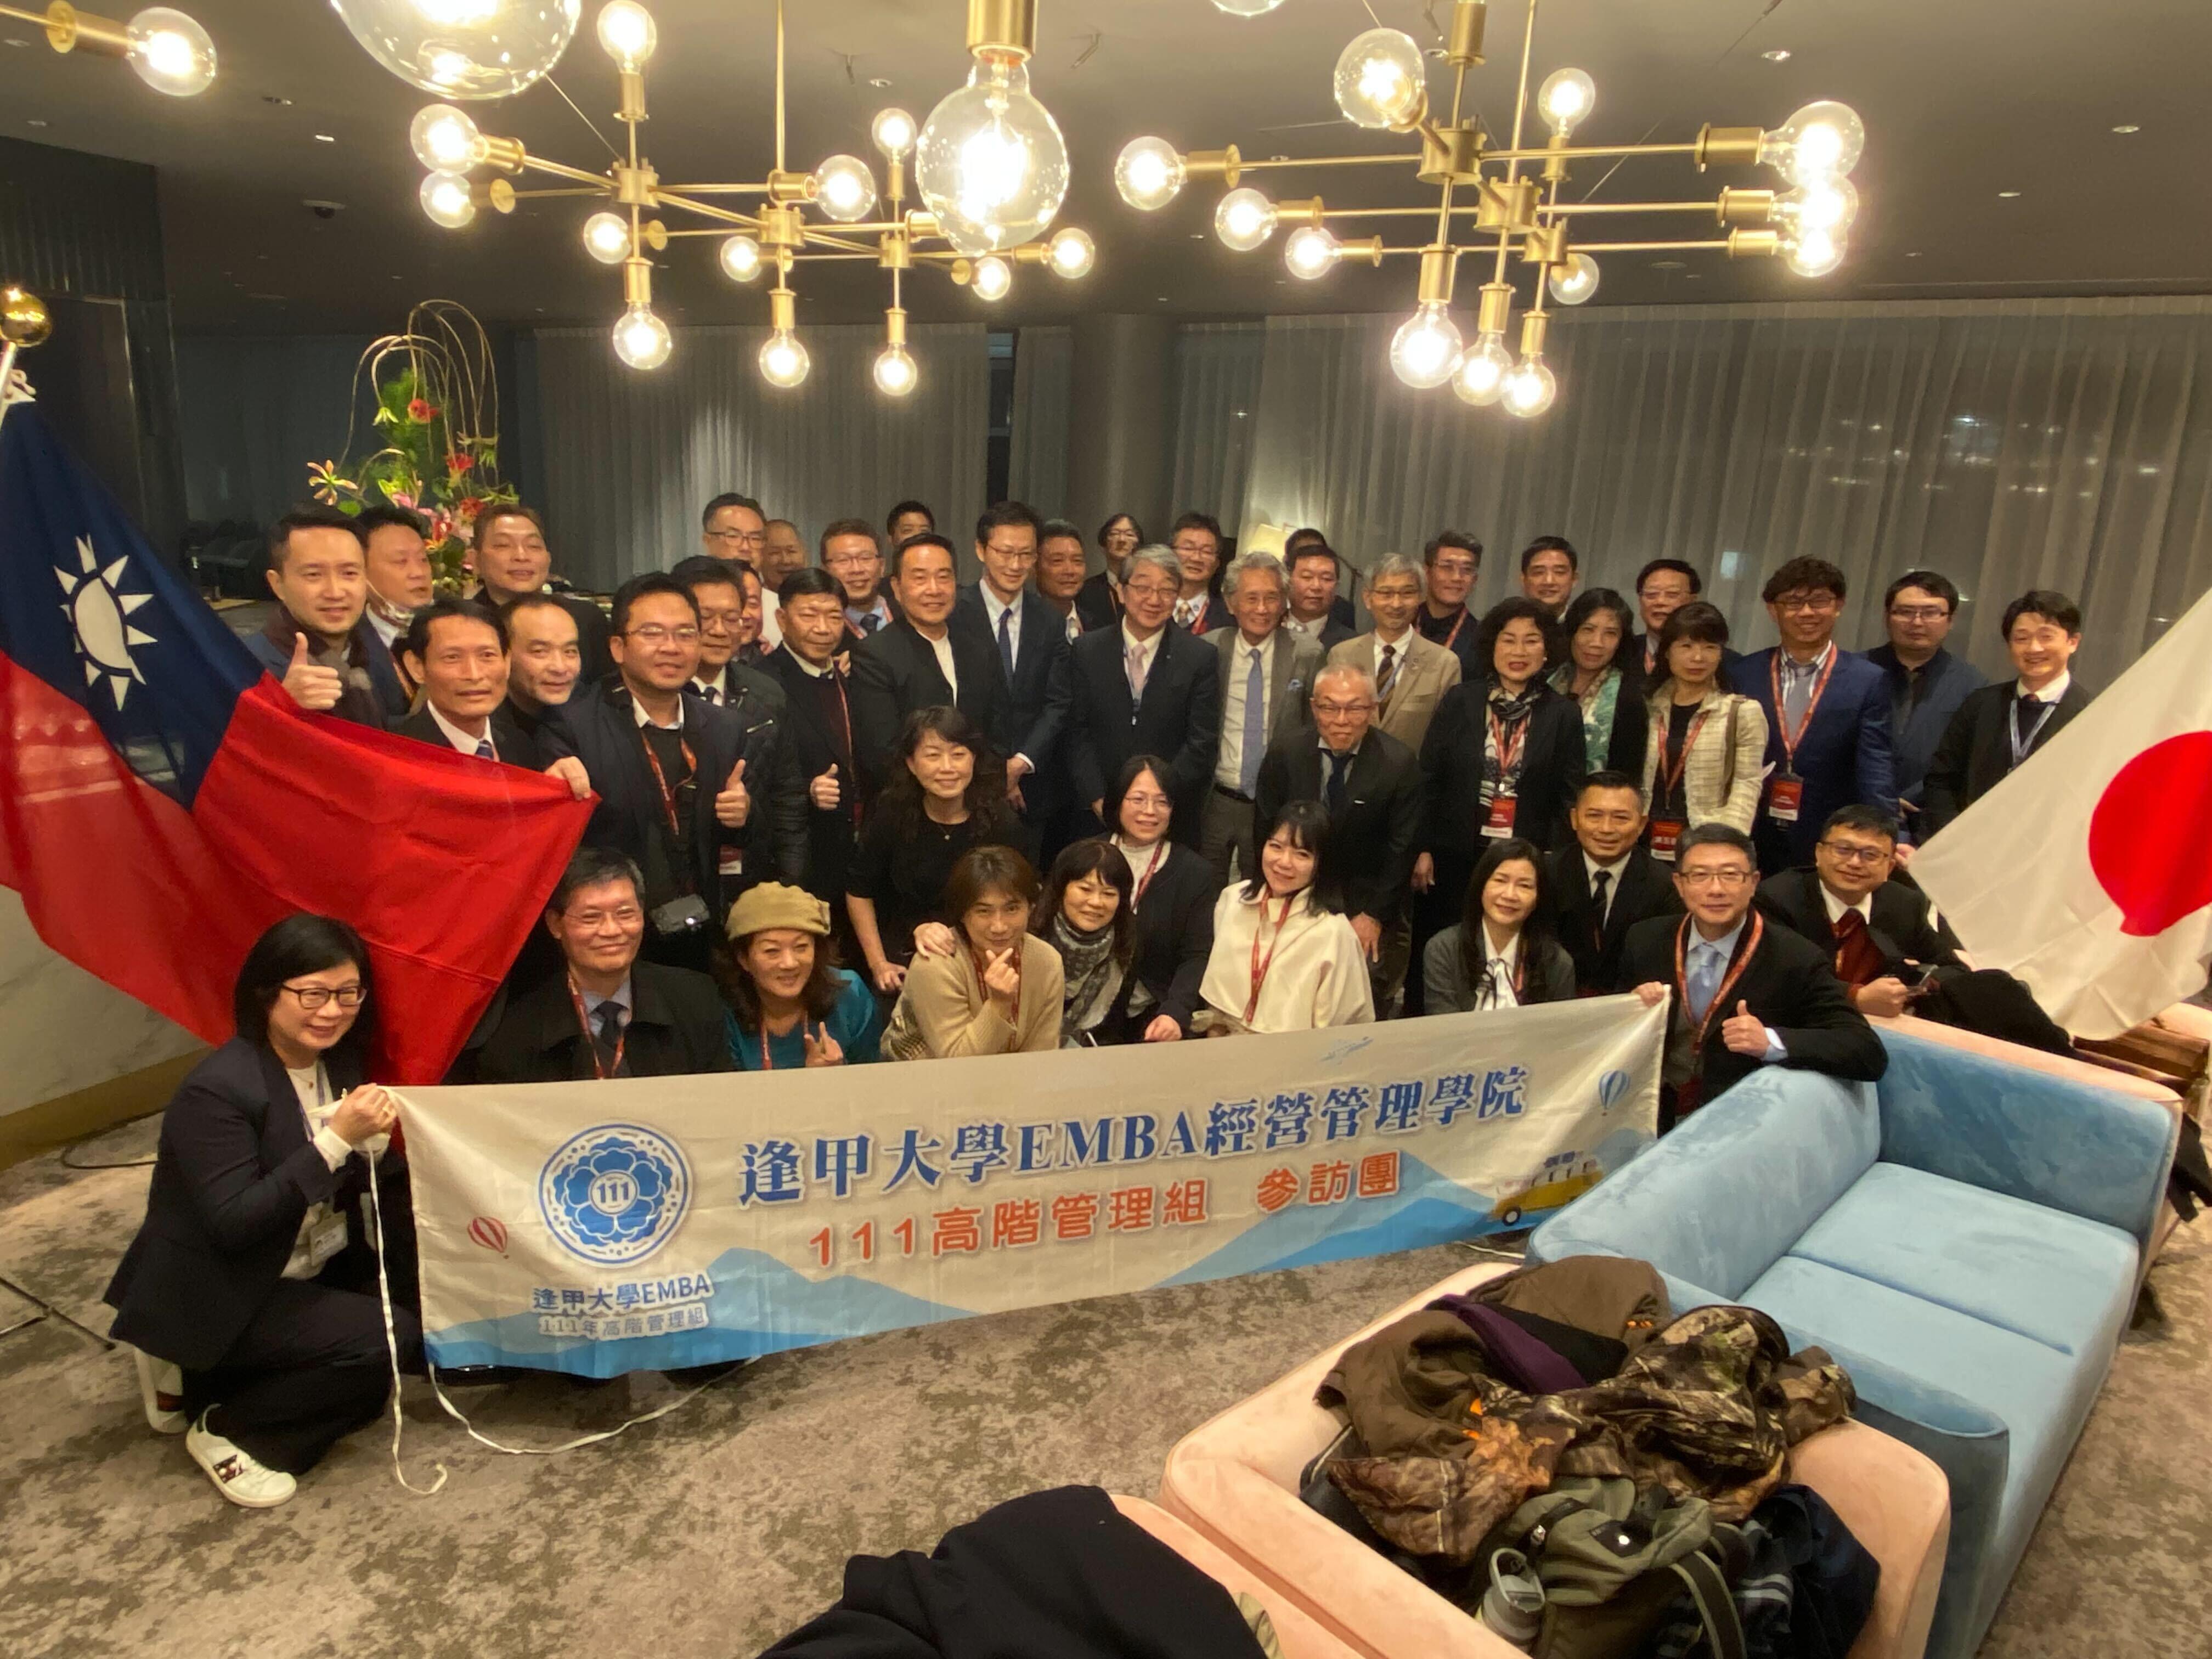 37 Faculty and Staff Members from Feng Chia University in Taiwan Visited Us